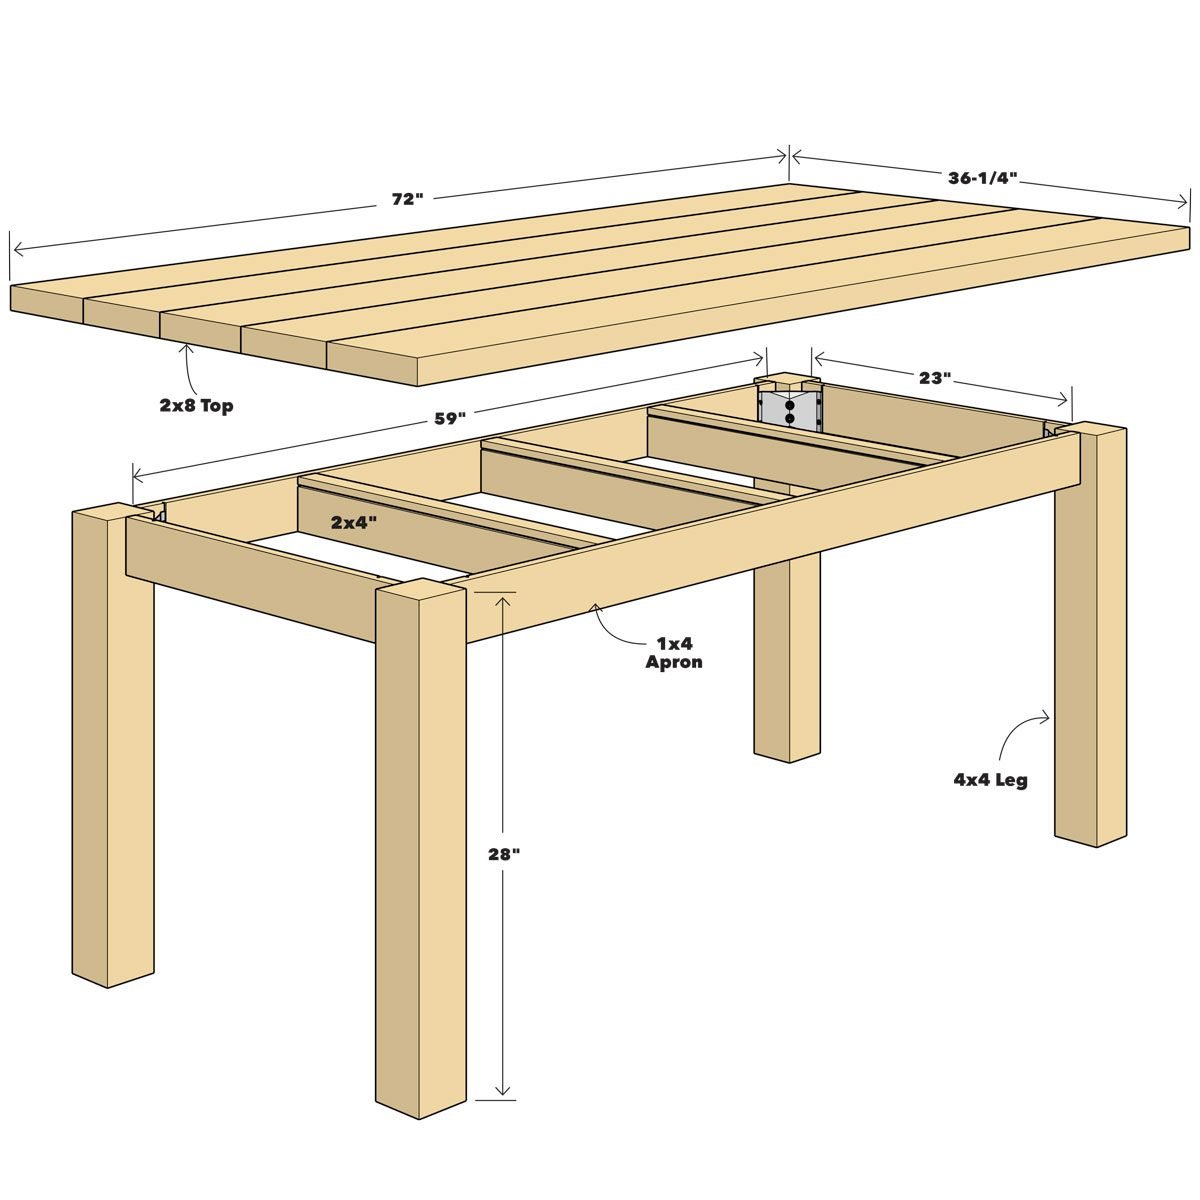 Woodworking table build